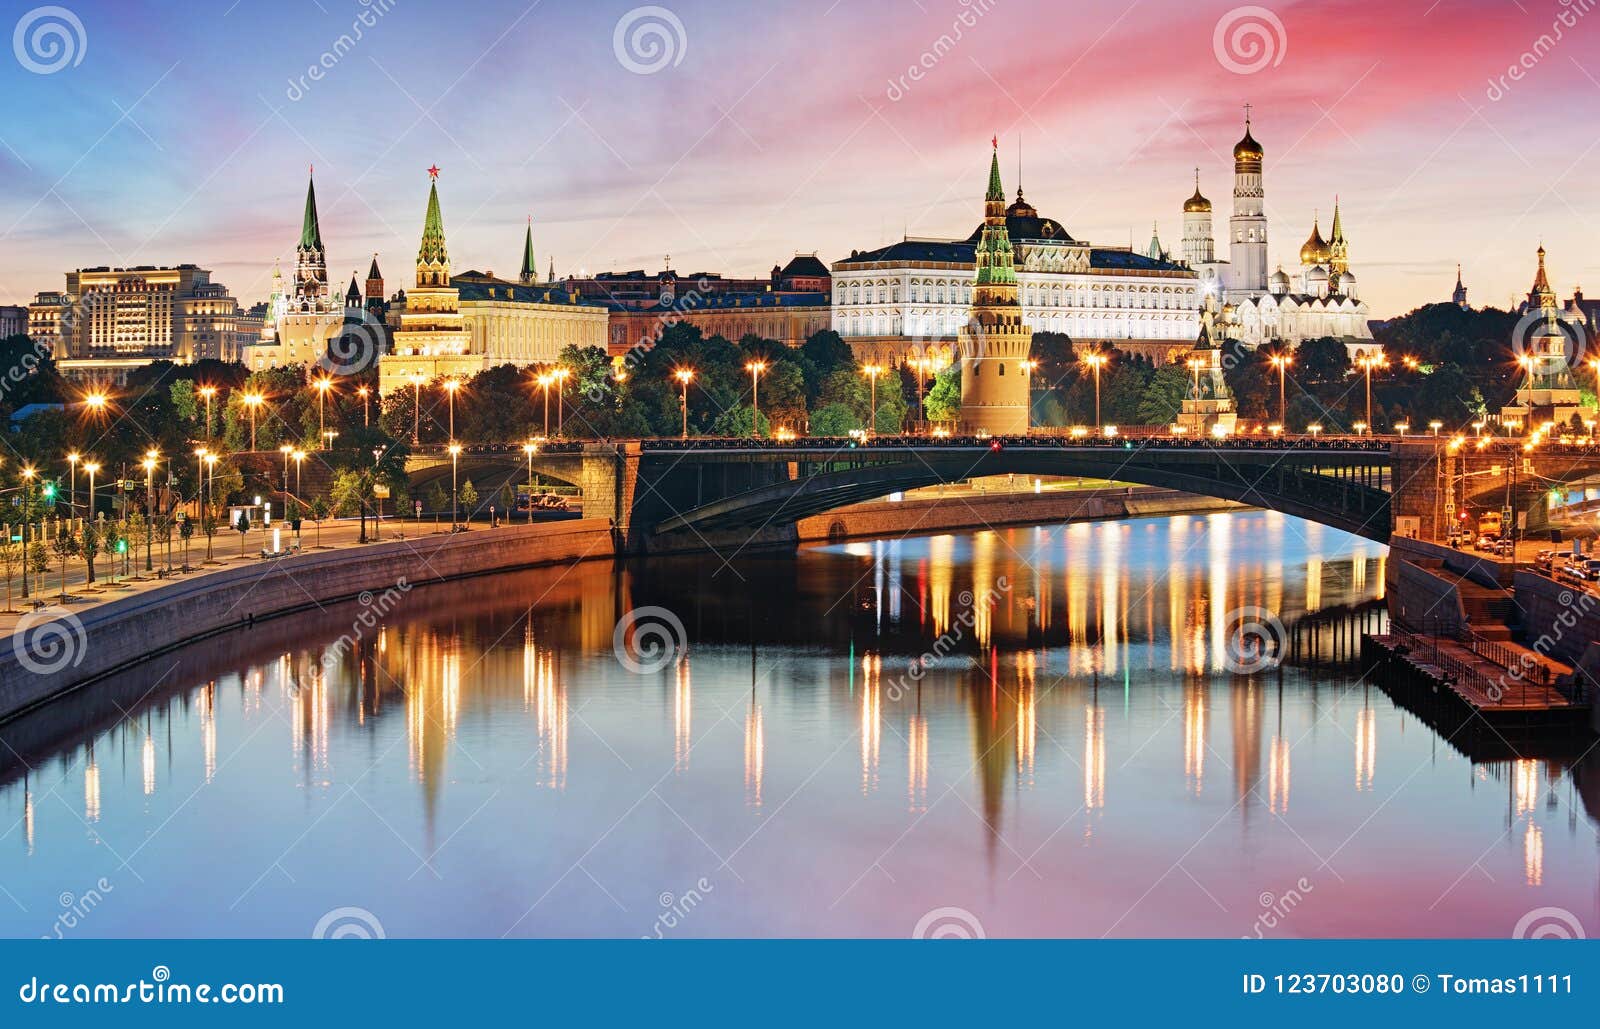 moscow kremlin and river in morning, russia